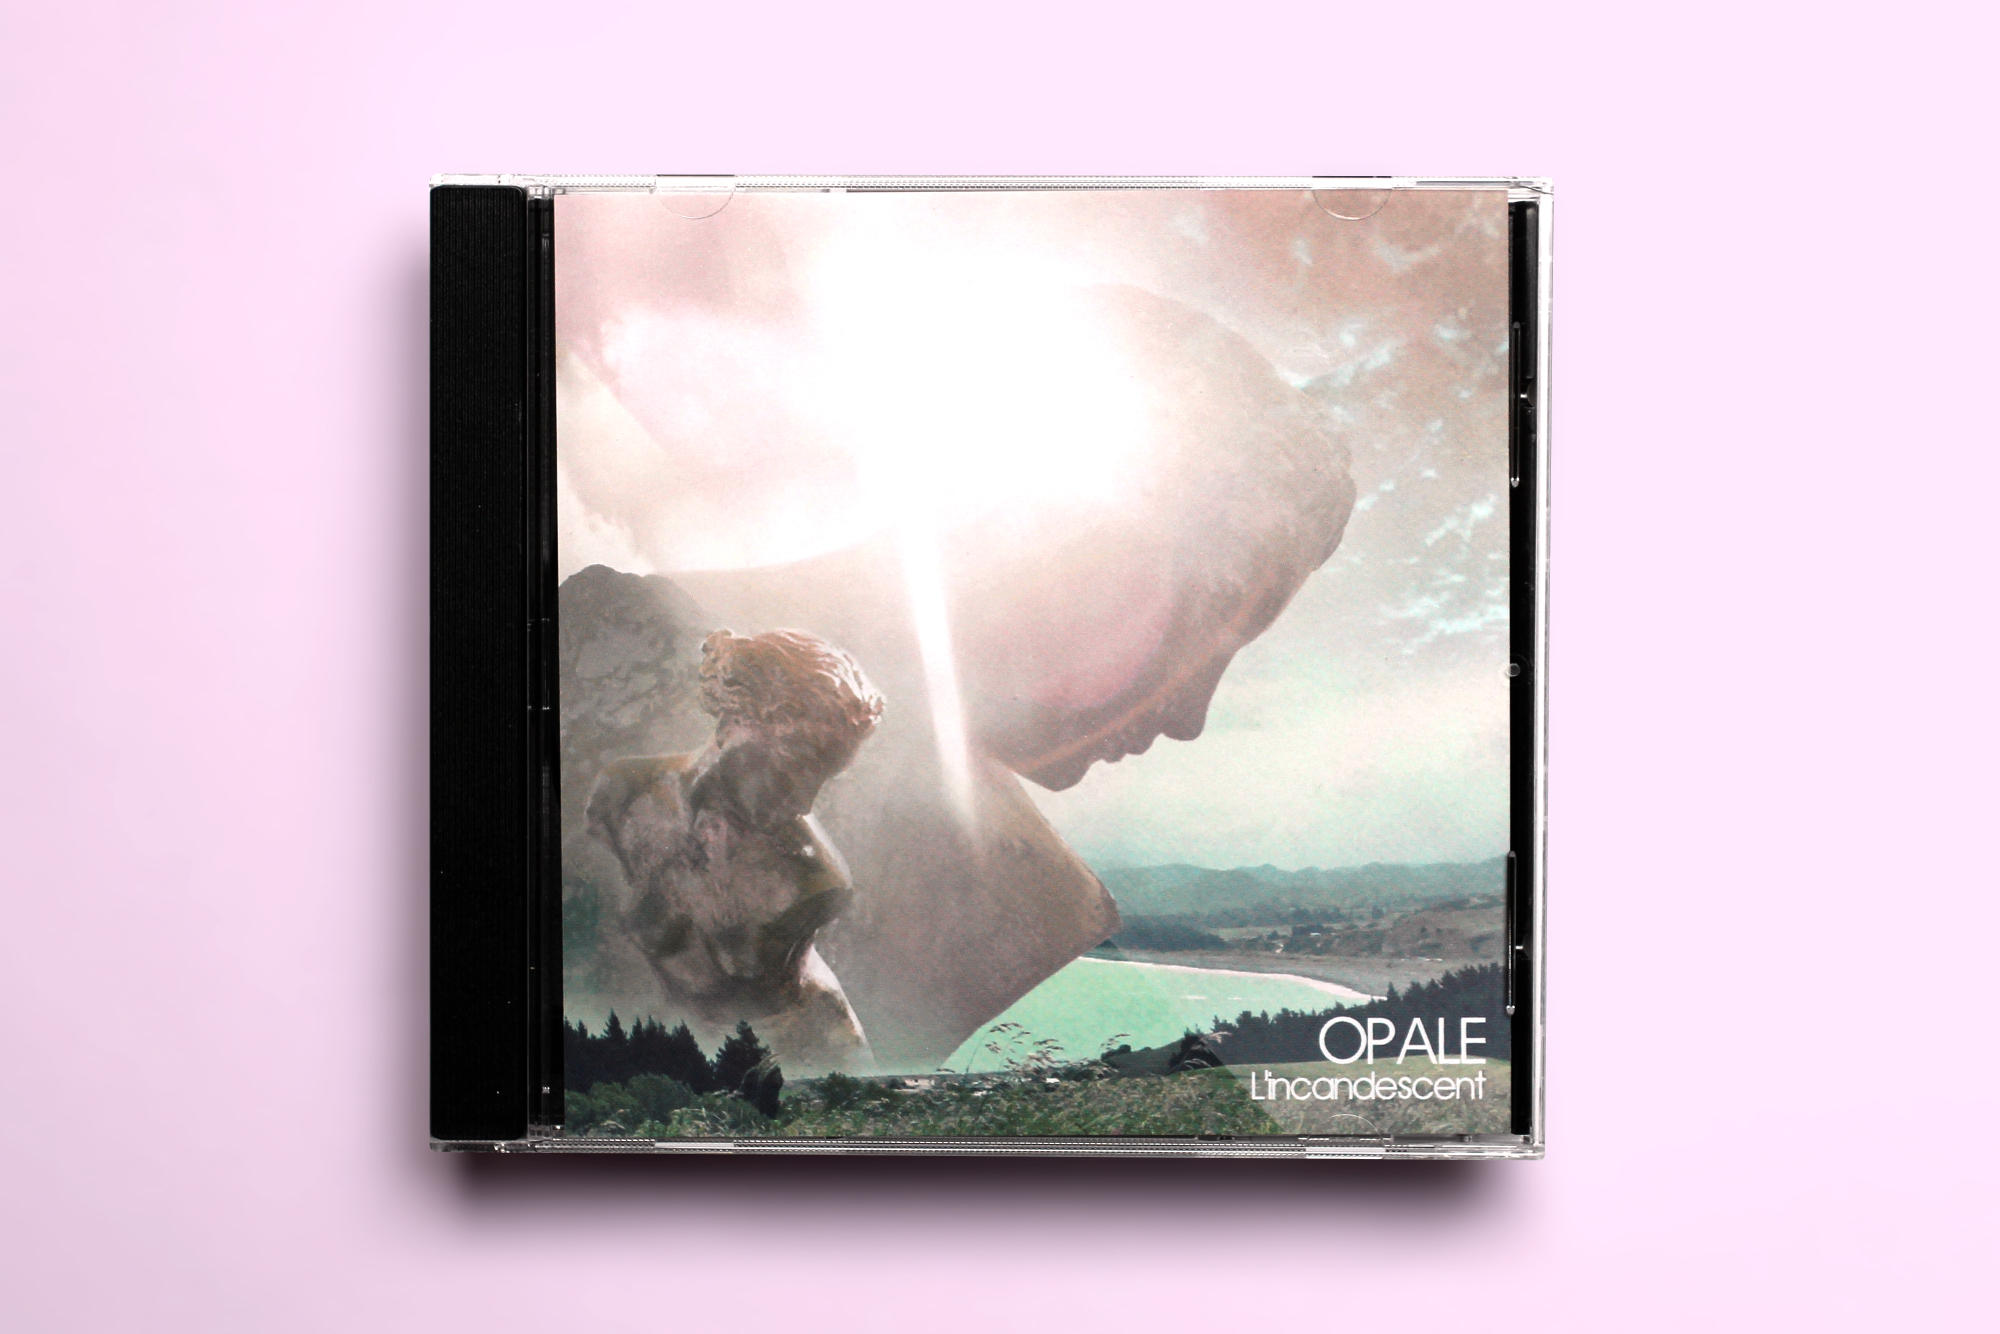 Opale "L'Incandescent" CD (Front Cover)